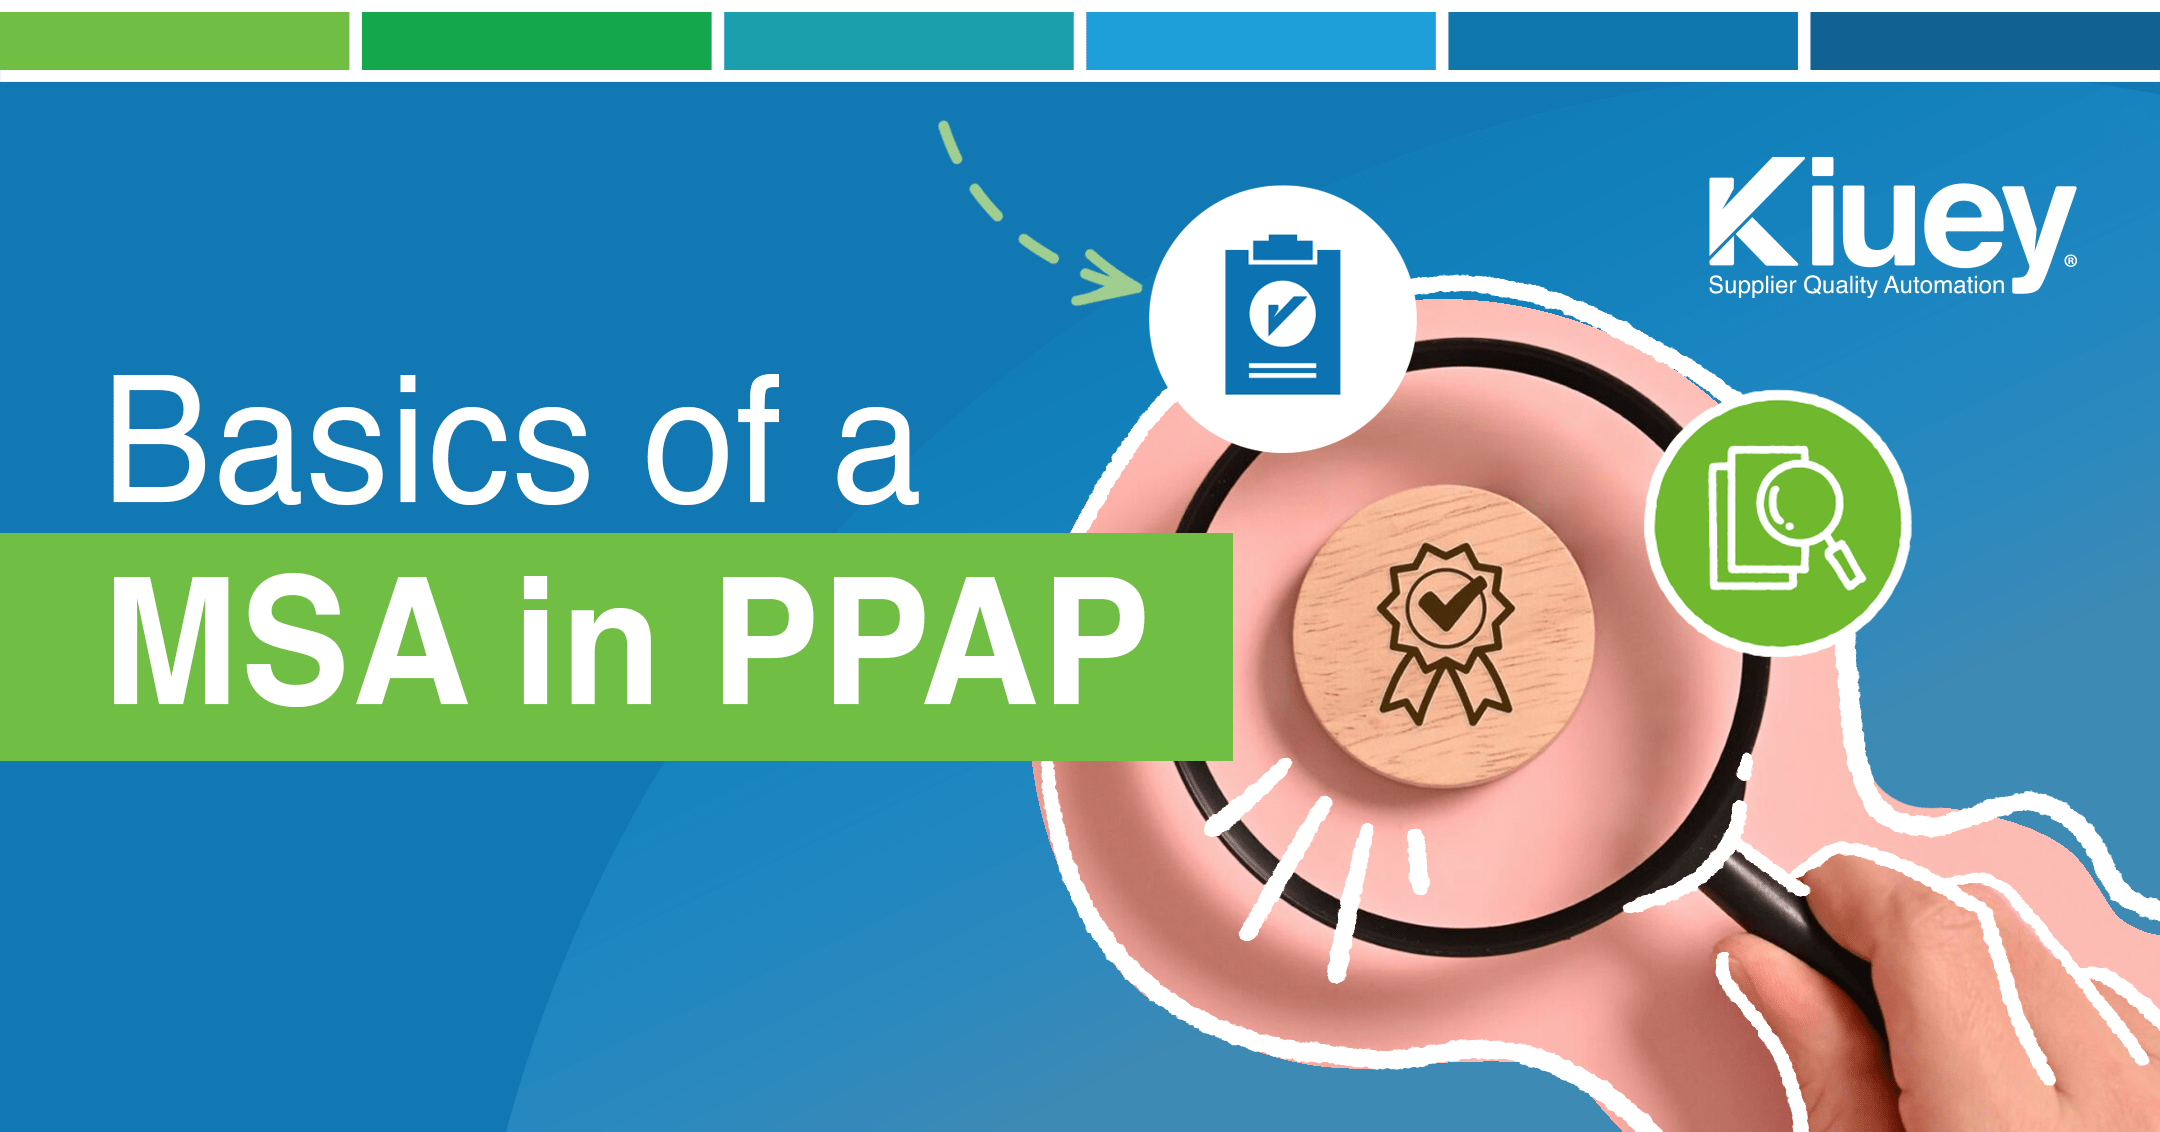 Basics of a MSA in PPAP